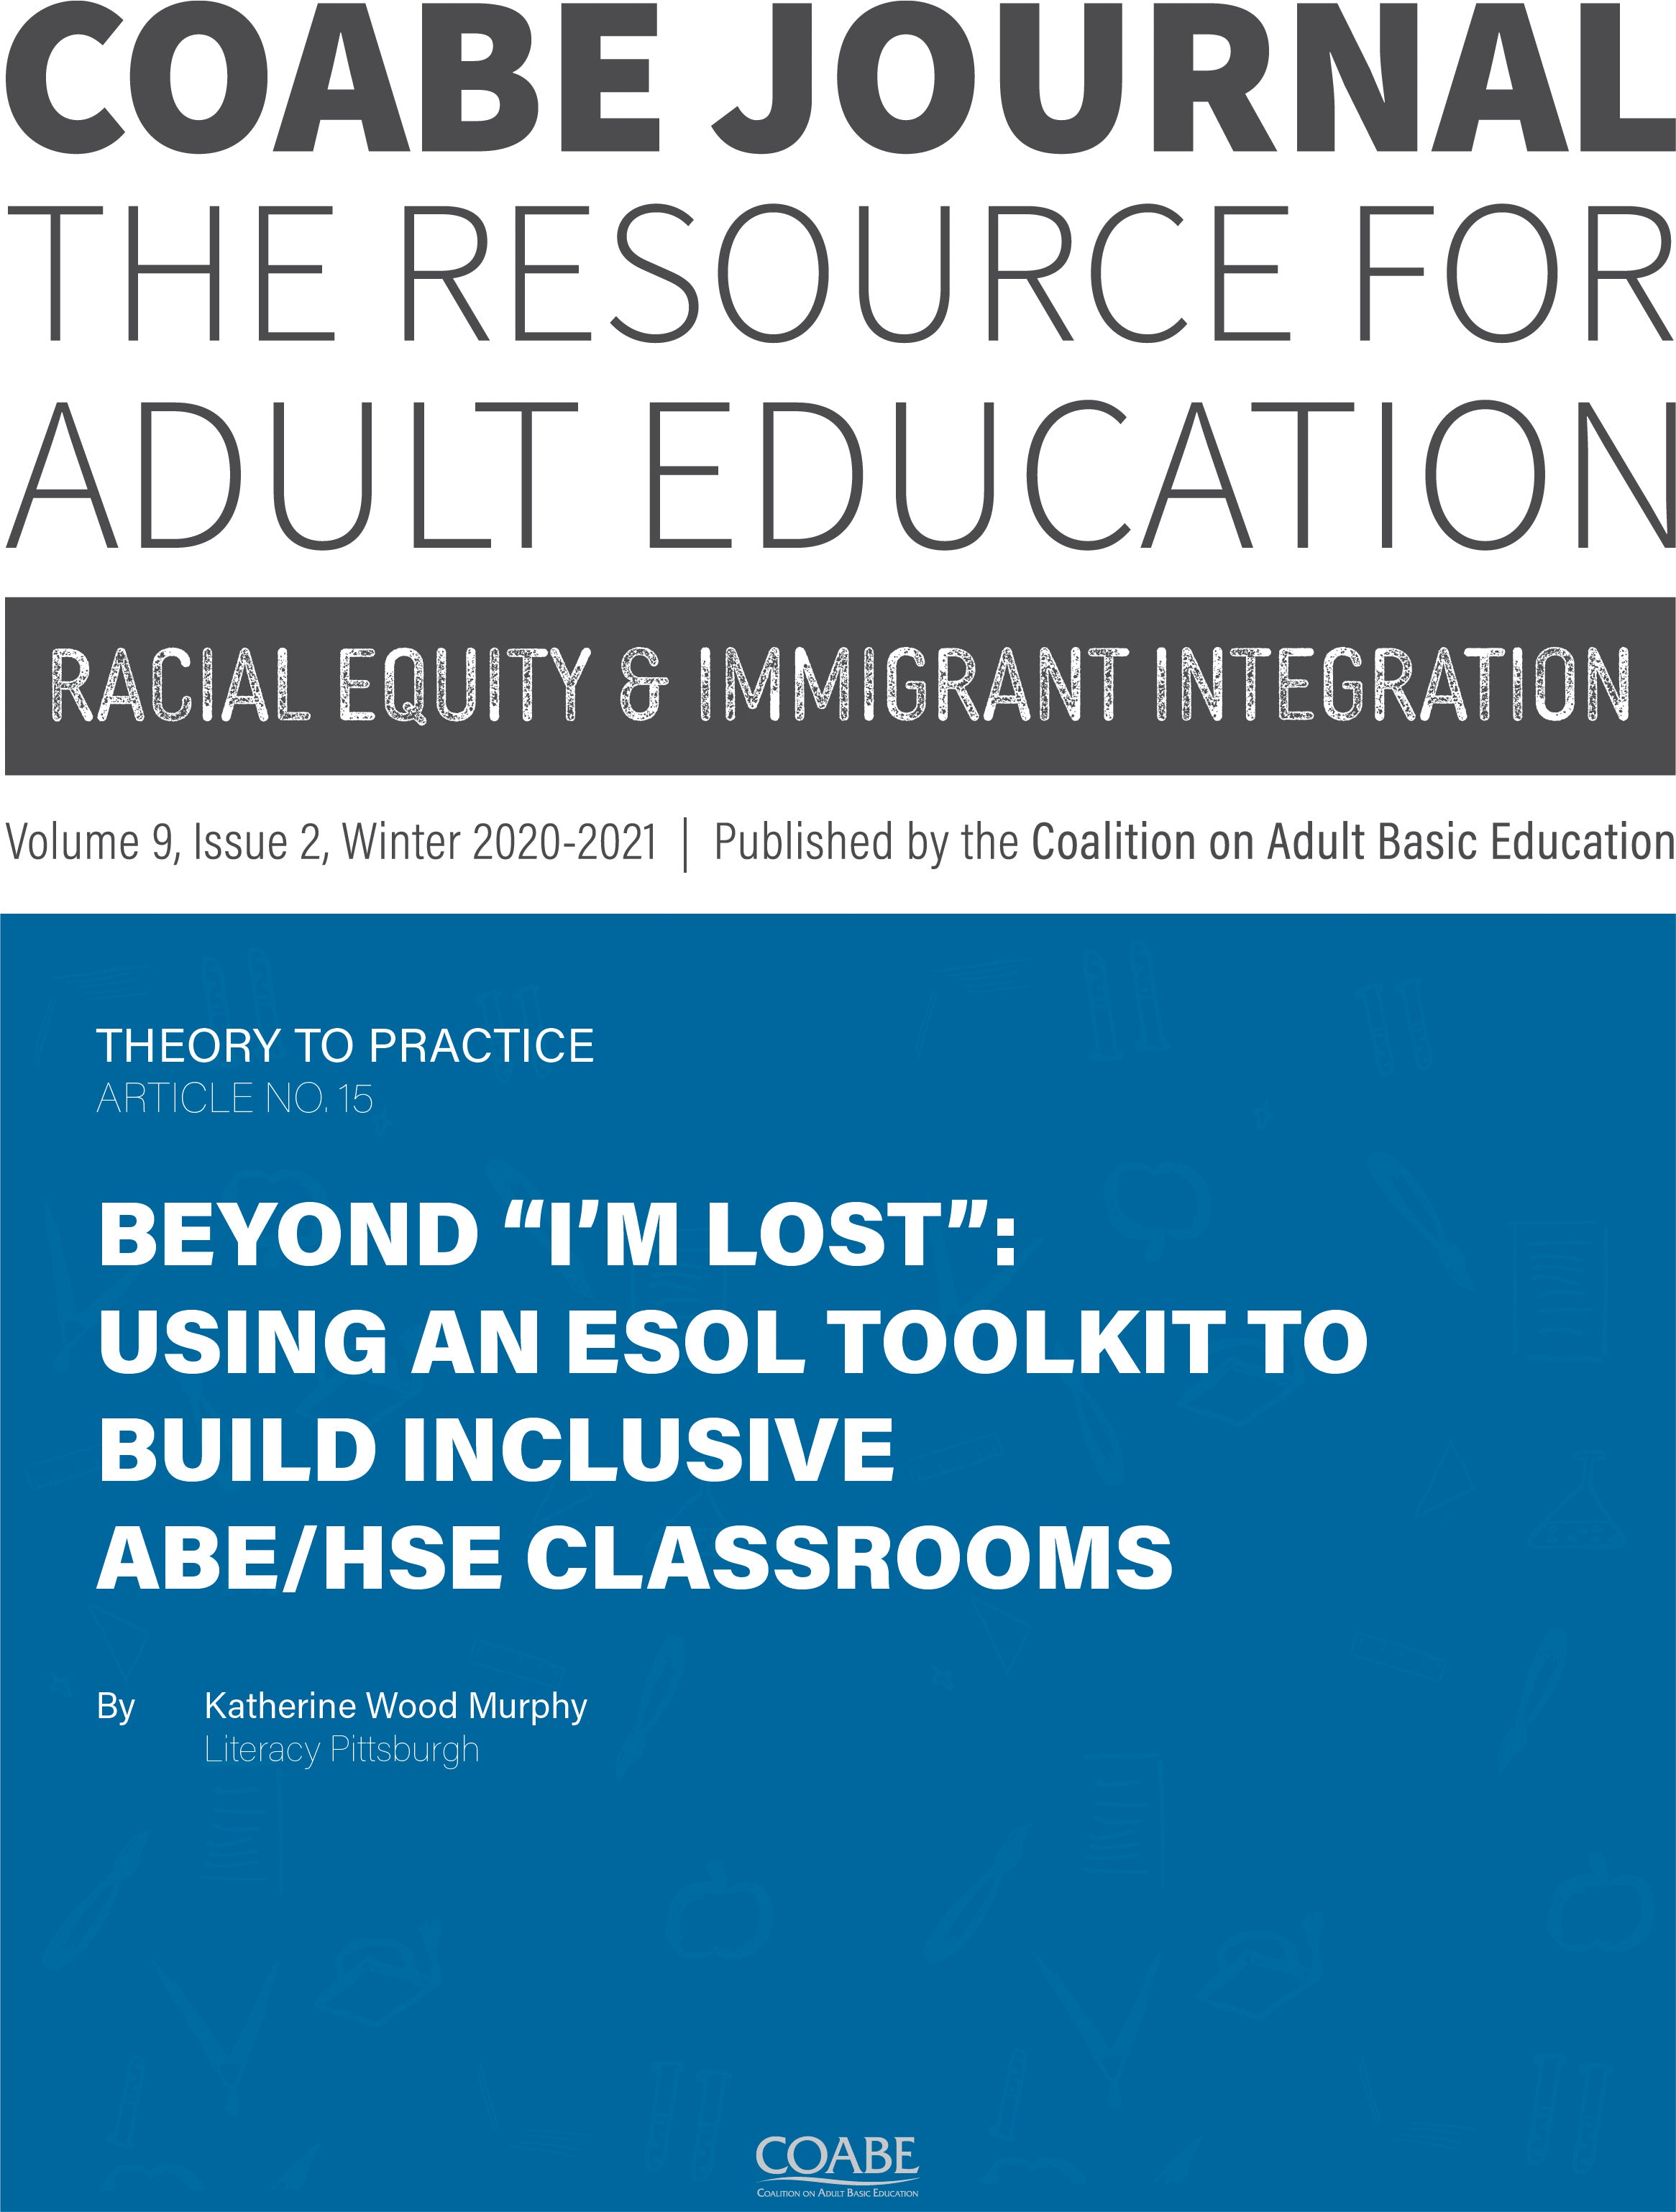 Article 15 / Beyond "I'm Lost": Using an ESOL Toolkit to Build Inclusive ABE/HSE Classrooms